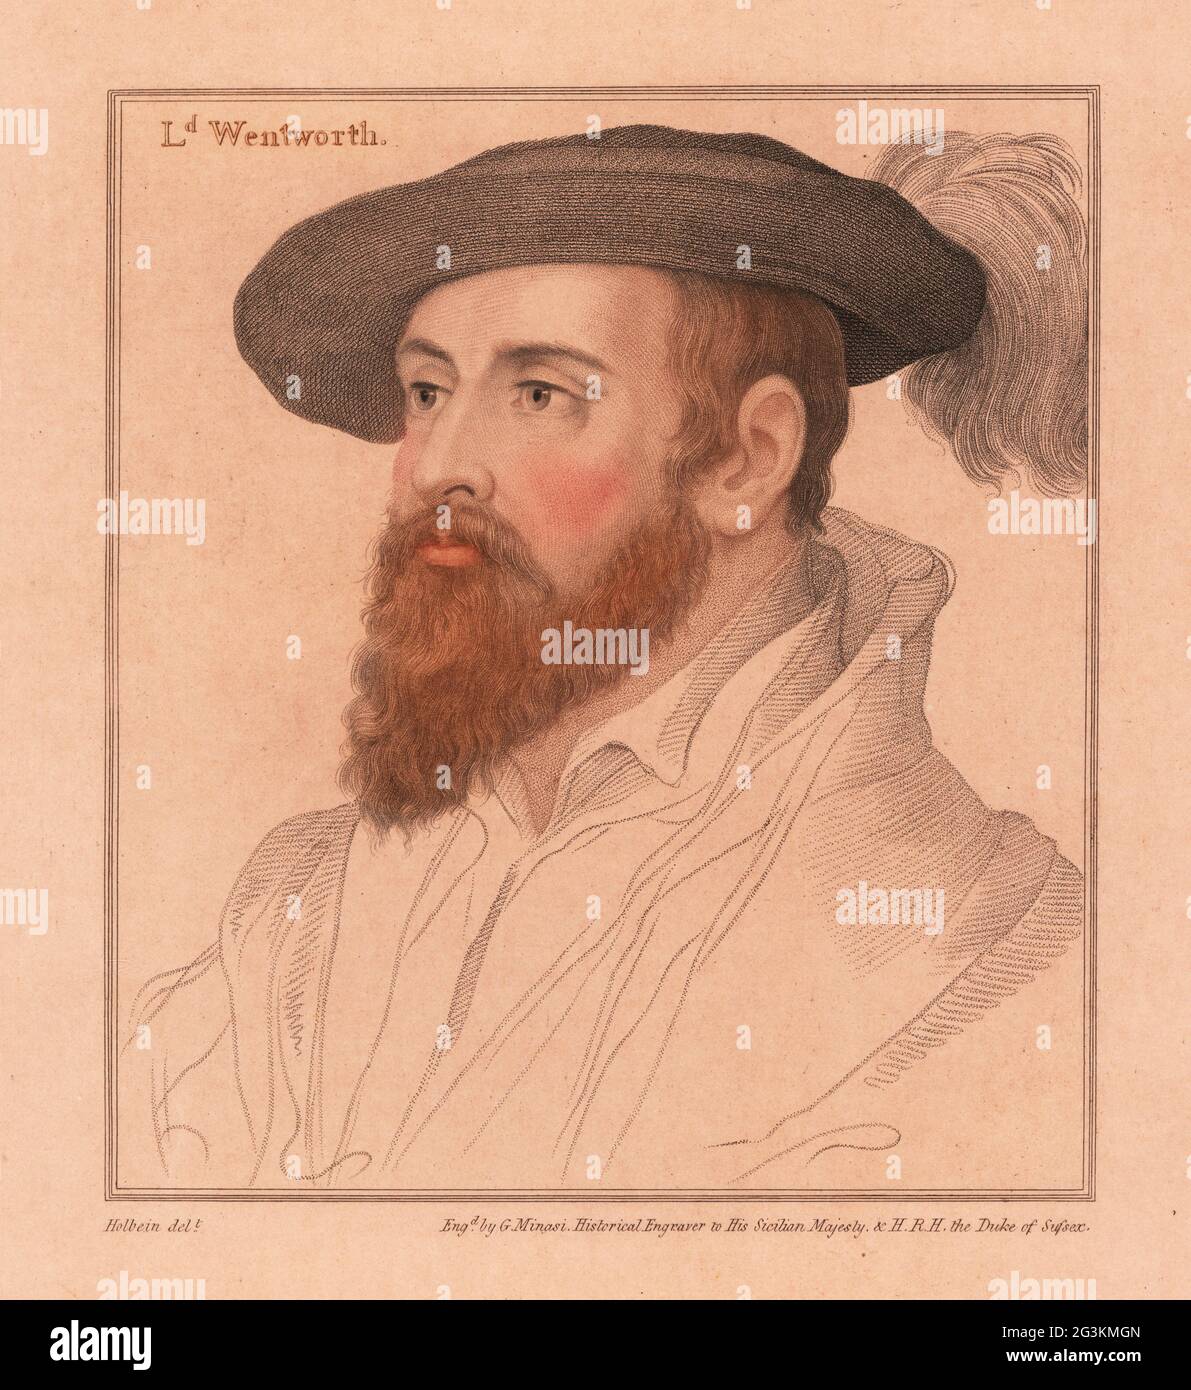 Thomas Wentworth, 1st Baron Wentworth, 6th Baron le Despencer (1501-1551), English peer and courtier, Lord Chamberlain under King Edward VI. Ld Wentworth. Handcoloured copperplate stipple engraving by G. Minasi after a portrait by Hans Holbein the Younger from Imitations of Original Drawings by Hans Holbein, John Chamberlaine, London, 1812. Stock Photo